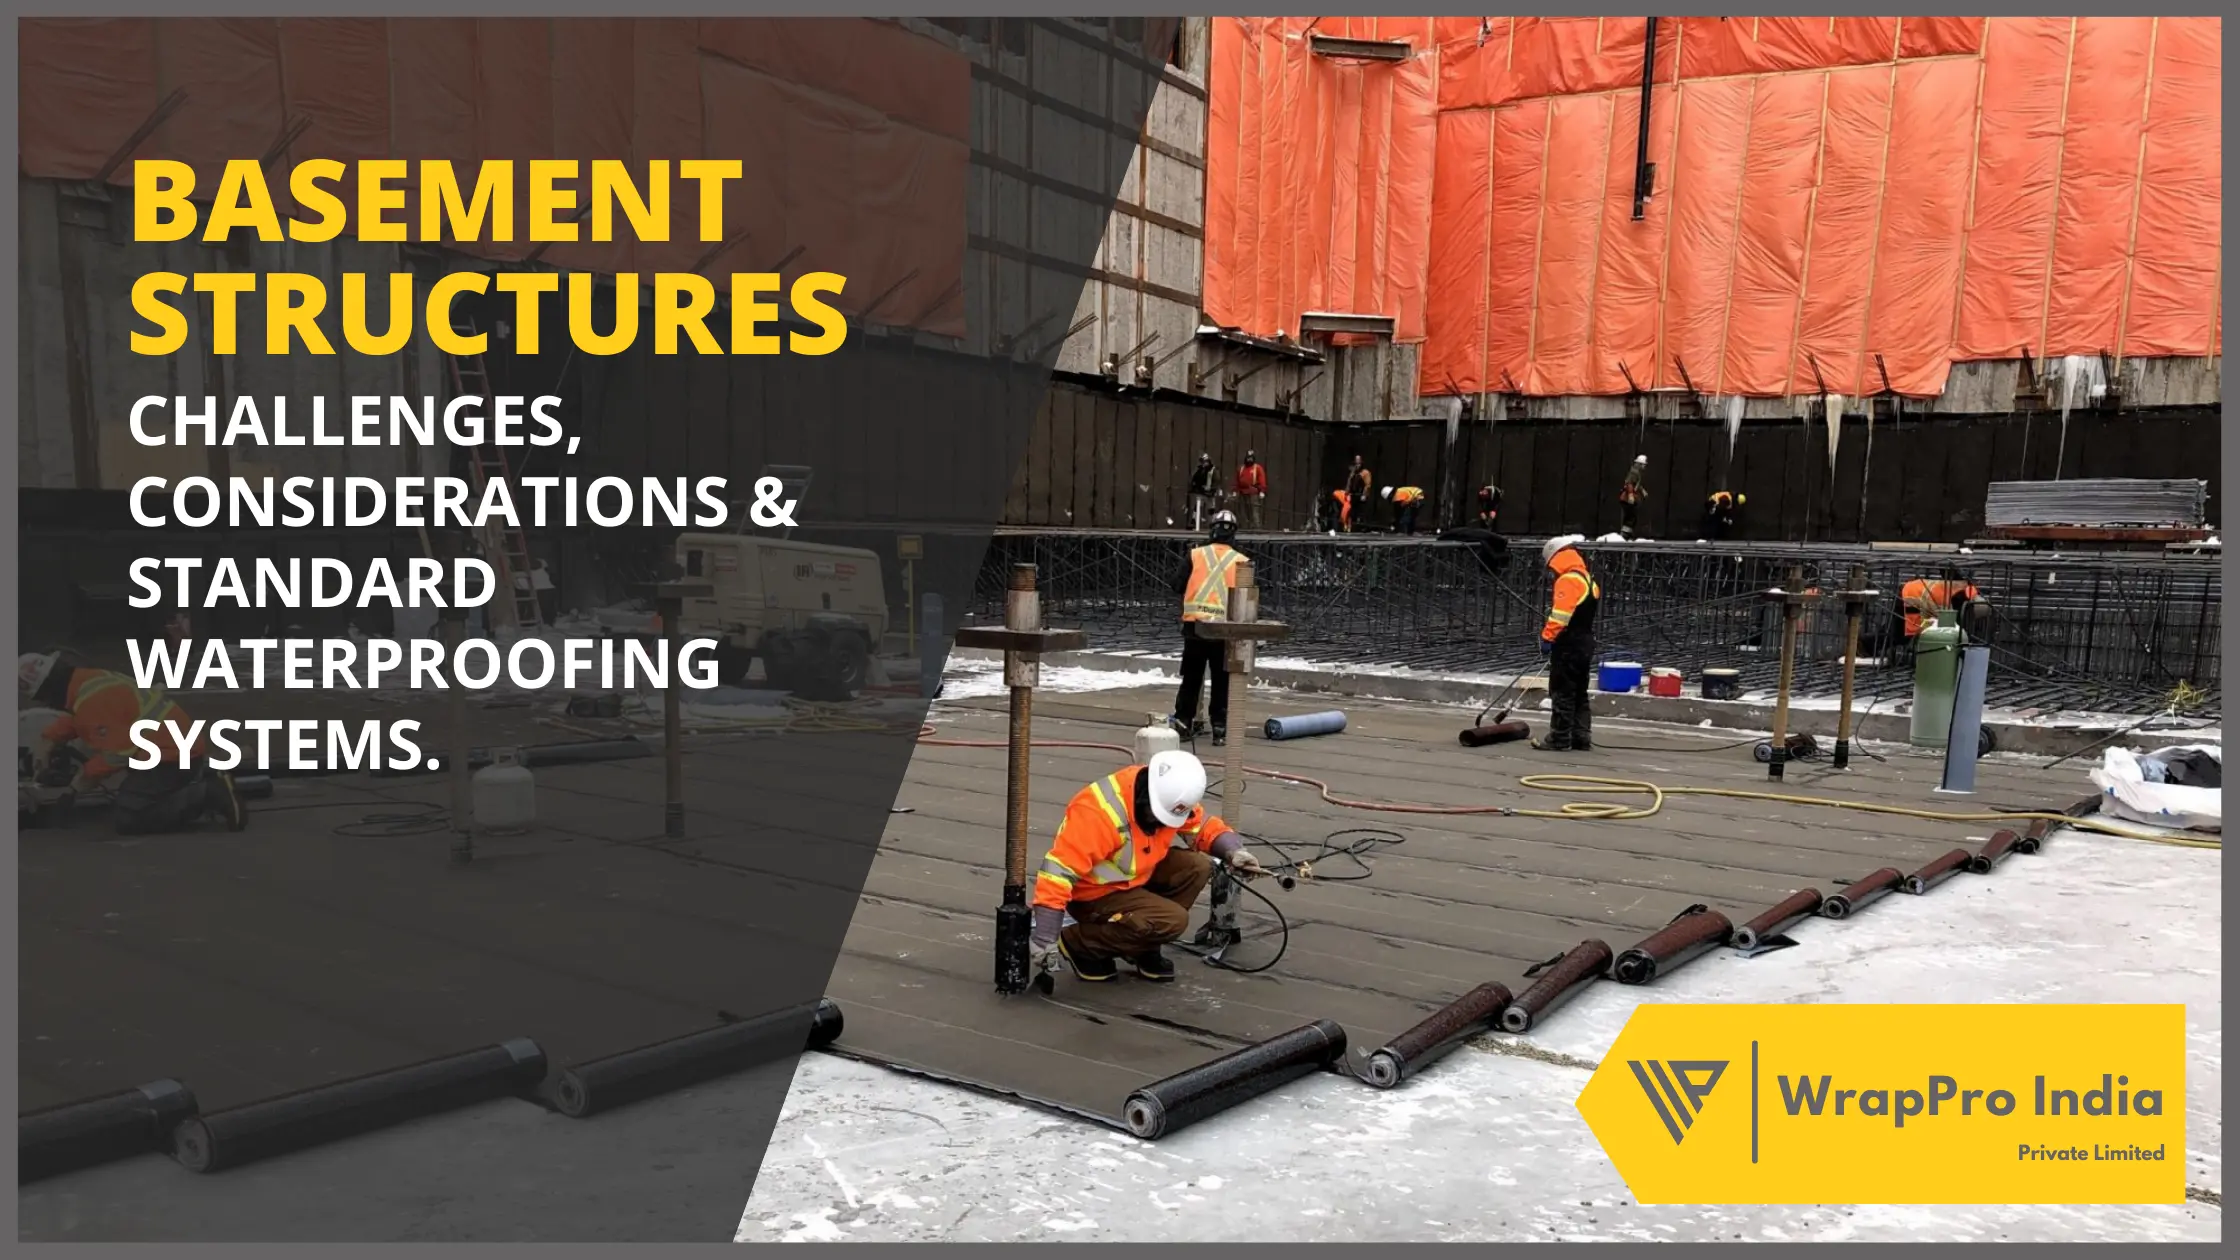 Basement Structures – Challenges, Considerations & Standard Waterproofing Systems